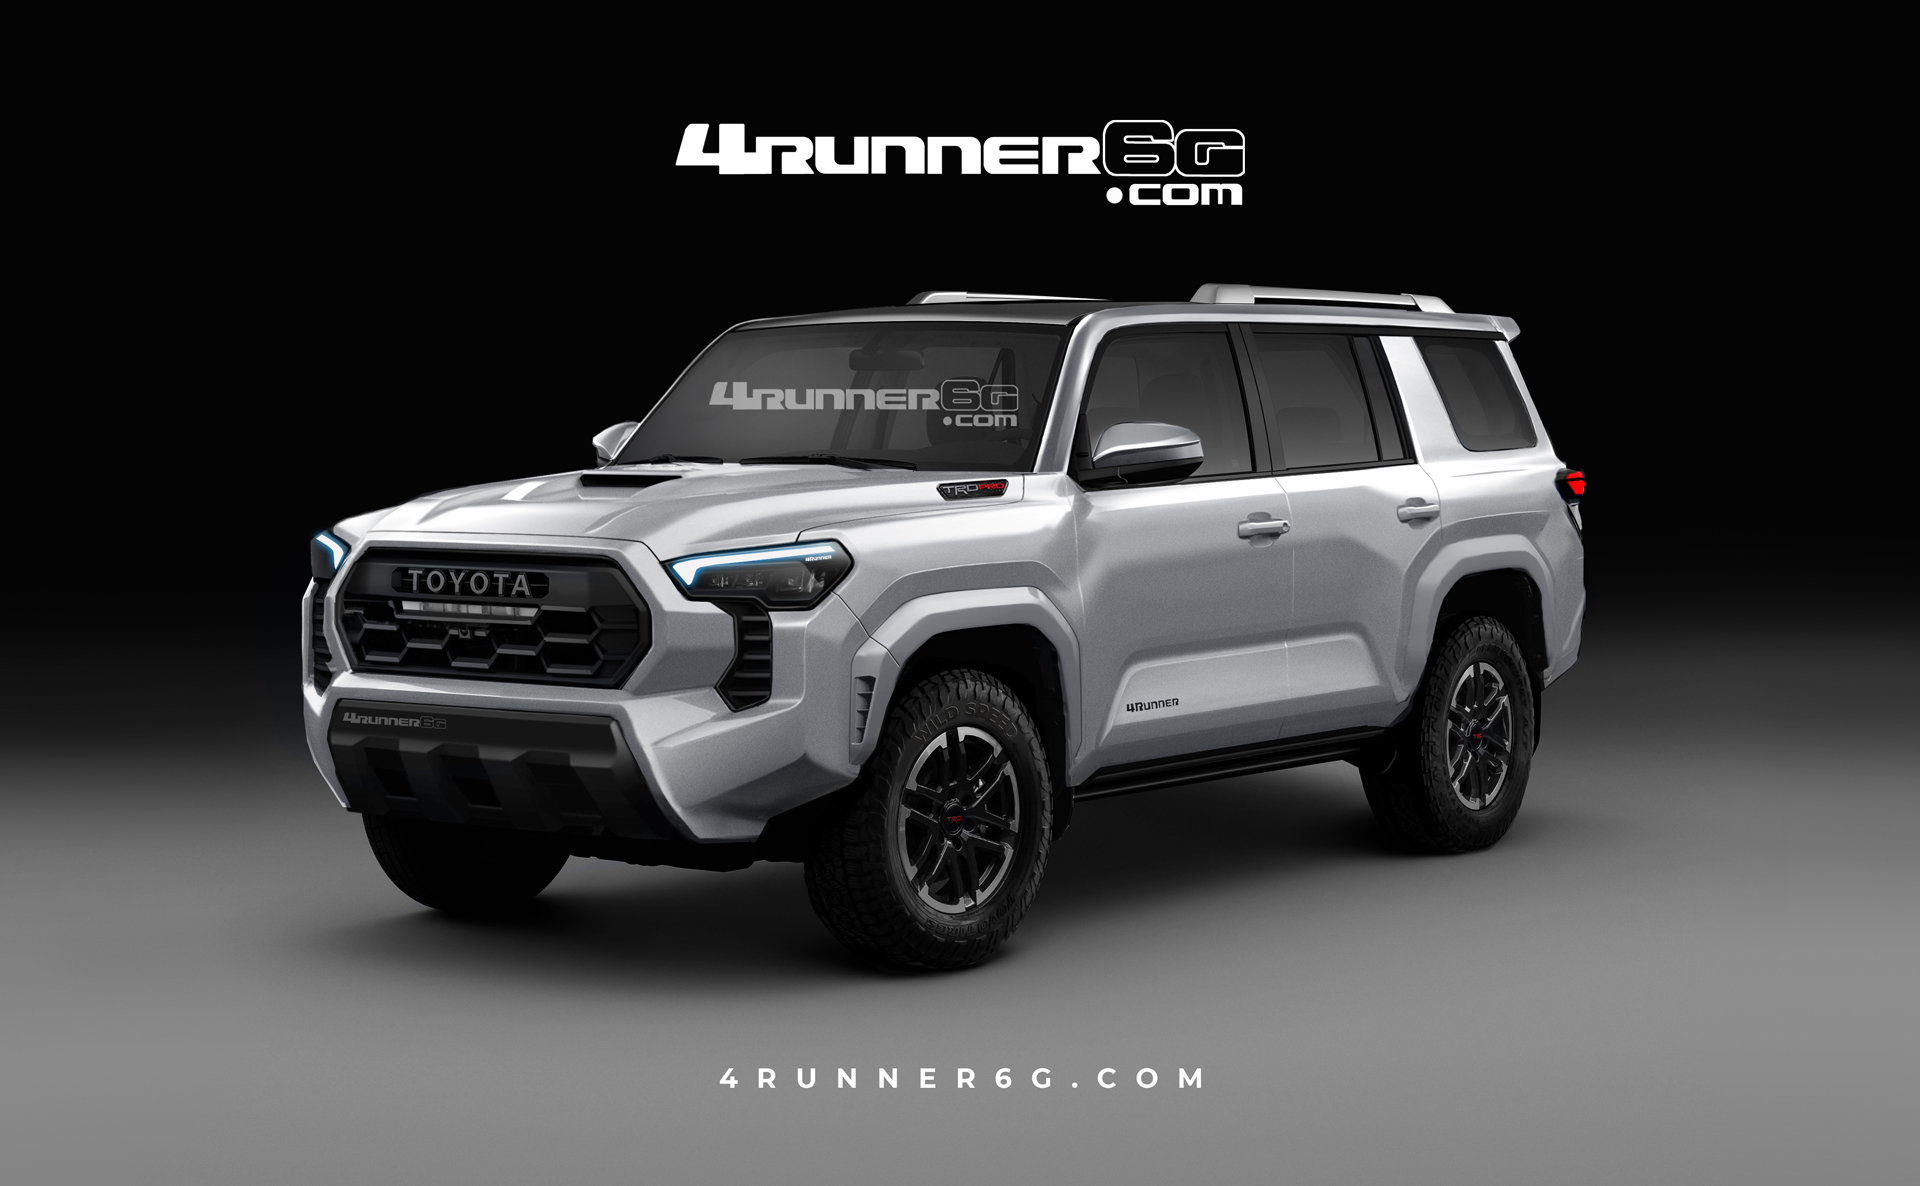 2025 Toyota 4runner 2025 4Runner (6th Gen) News, Specs, Engines, Release Date, Production Date & Preview Renderings -- Insider Info (as of 7/30/23) 2025 Toyota-4Runner-Front-S-Celestial-Silver